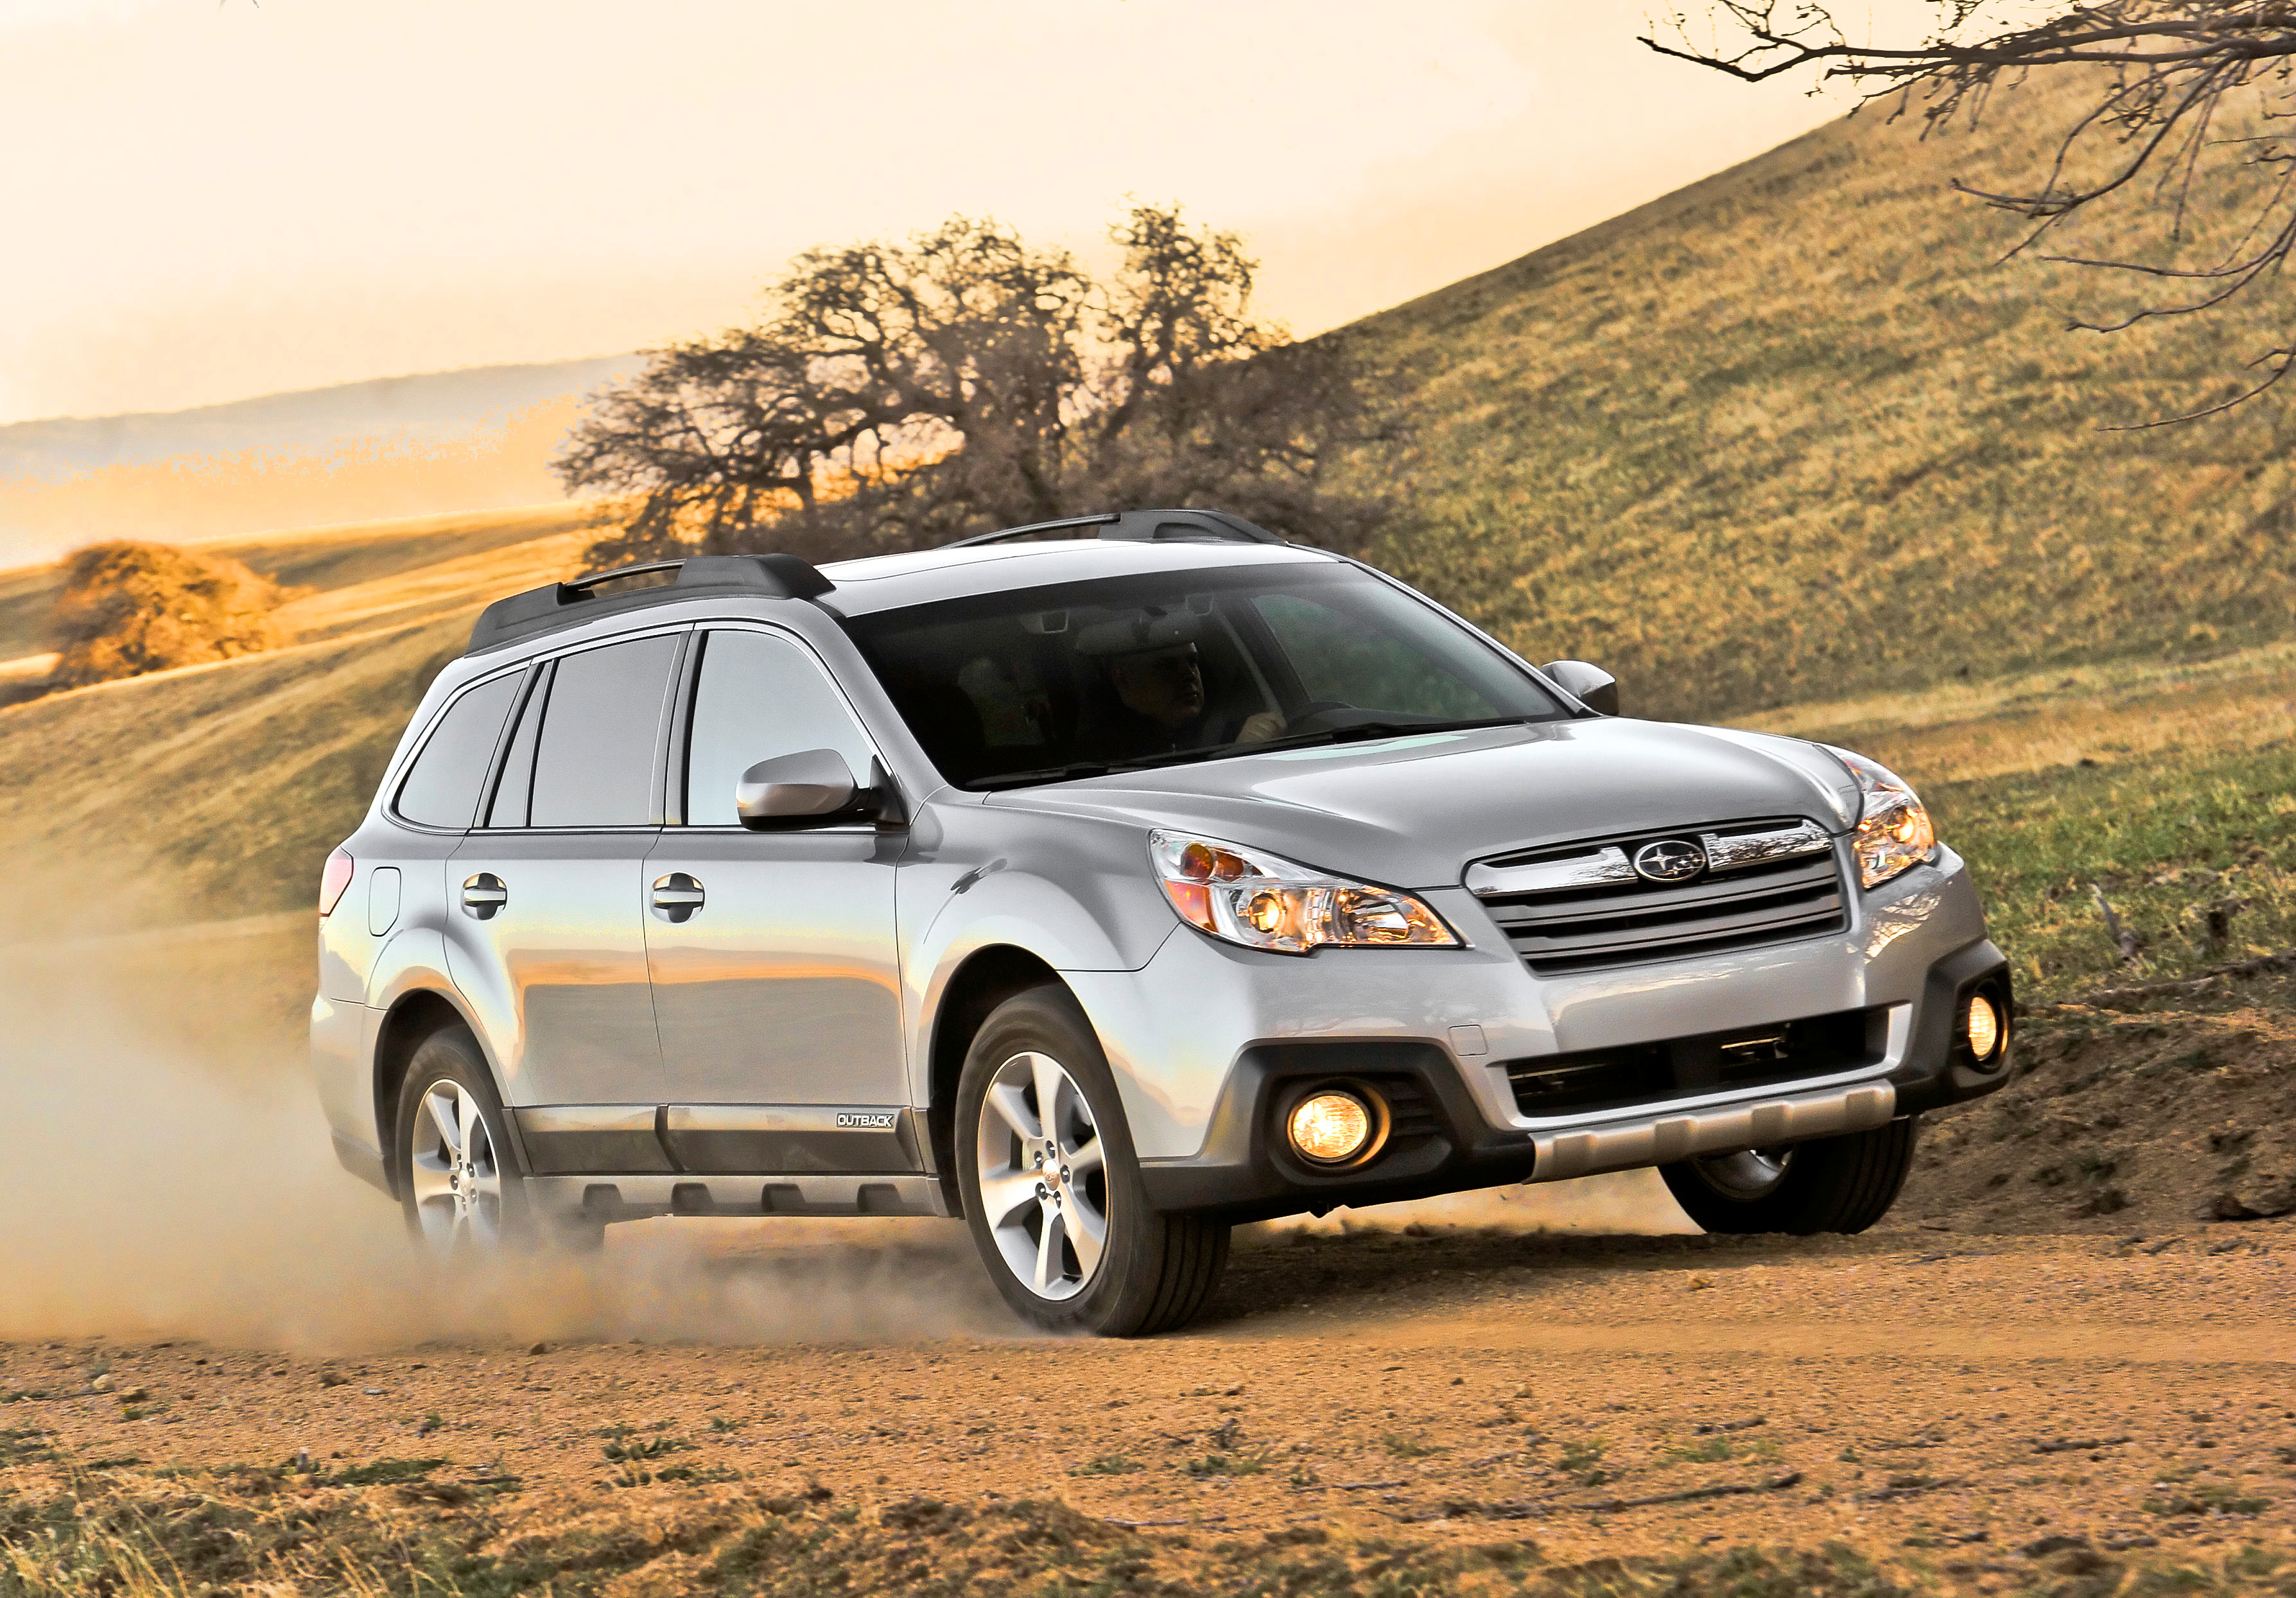 Subaru Outback Backgrounds on Wallpapers Vista